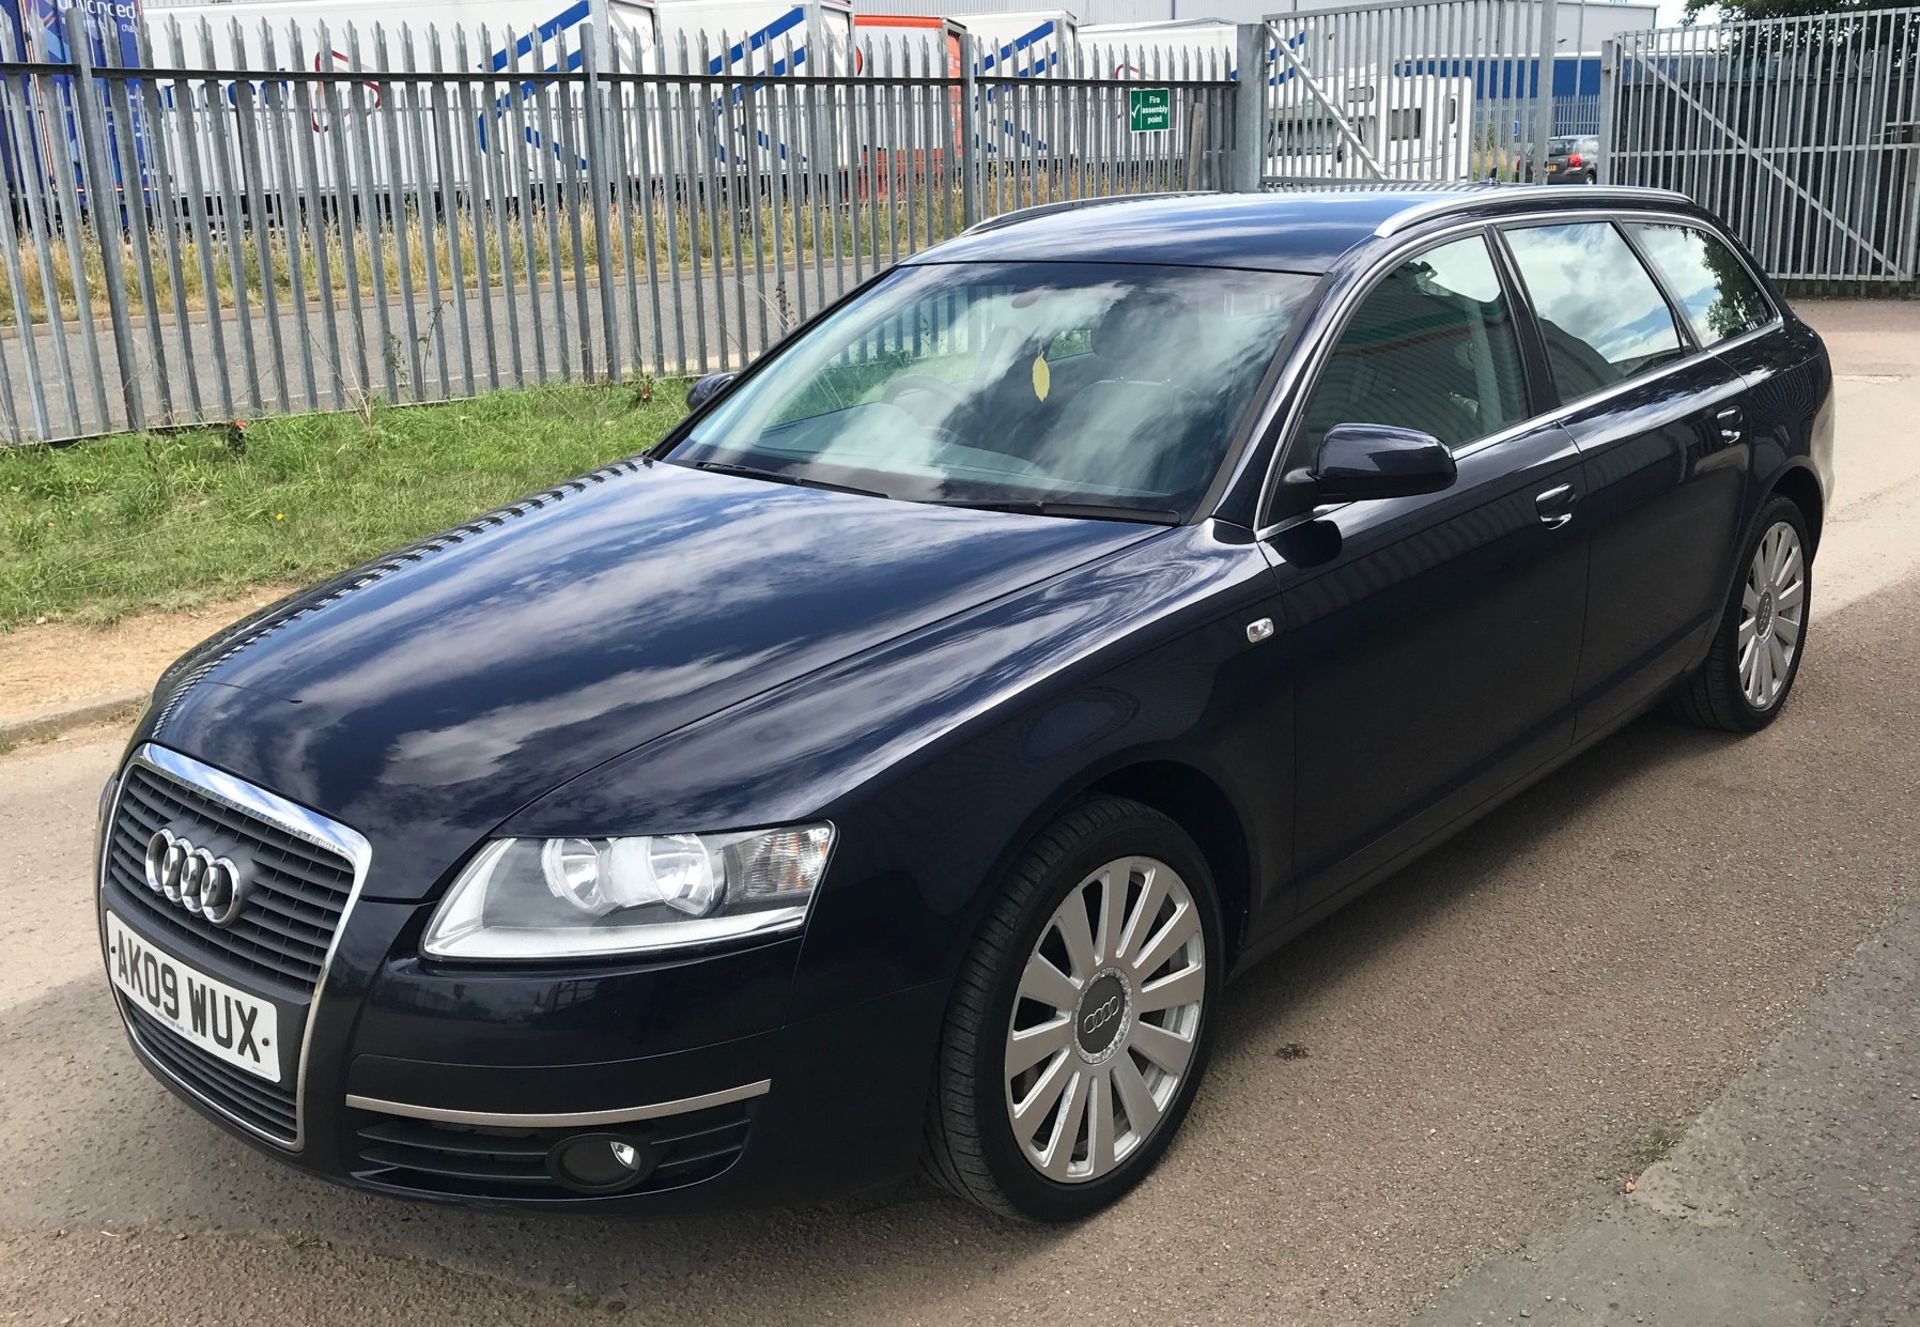 2009 Audi A6 2.0 Tdi Le 5 Door Estate - CL505 - NO VAT ON THE HAMMER - Location: Corby, Northamptons - Image 7 of 19